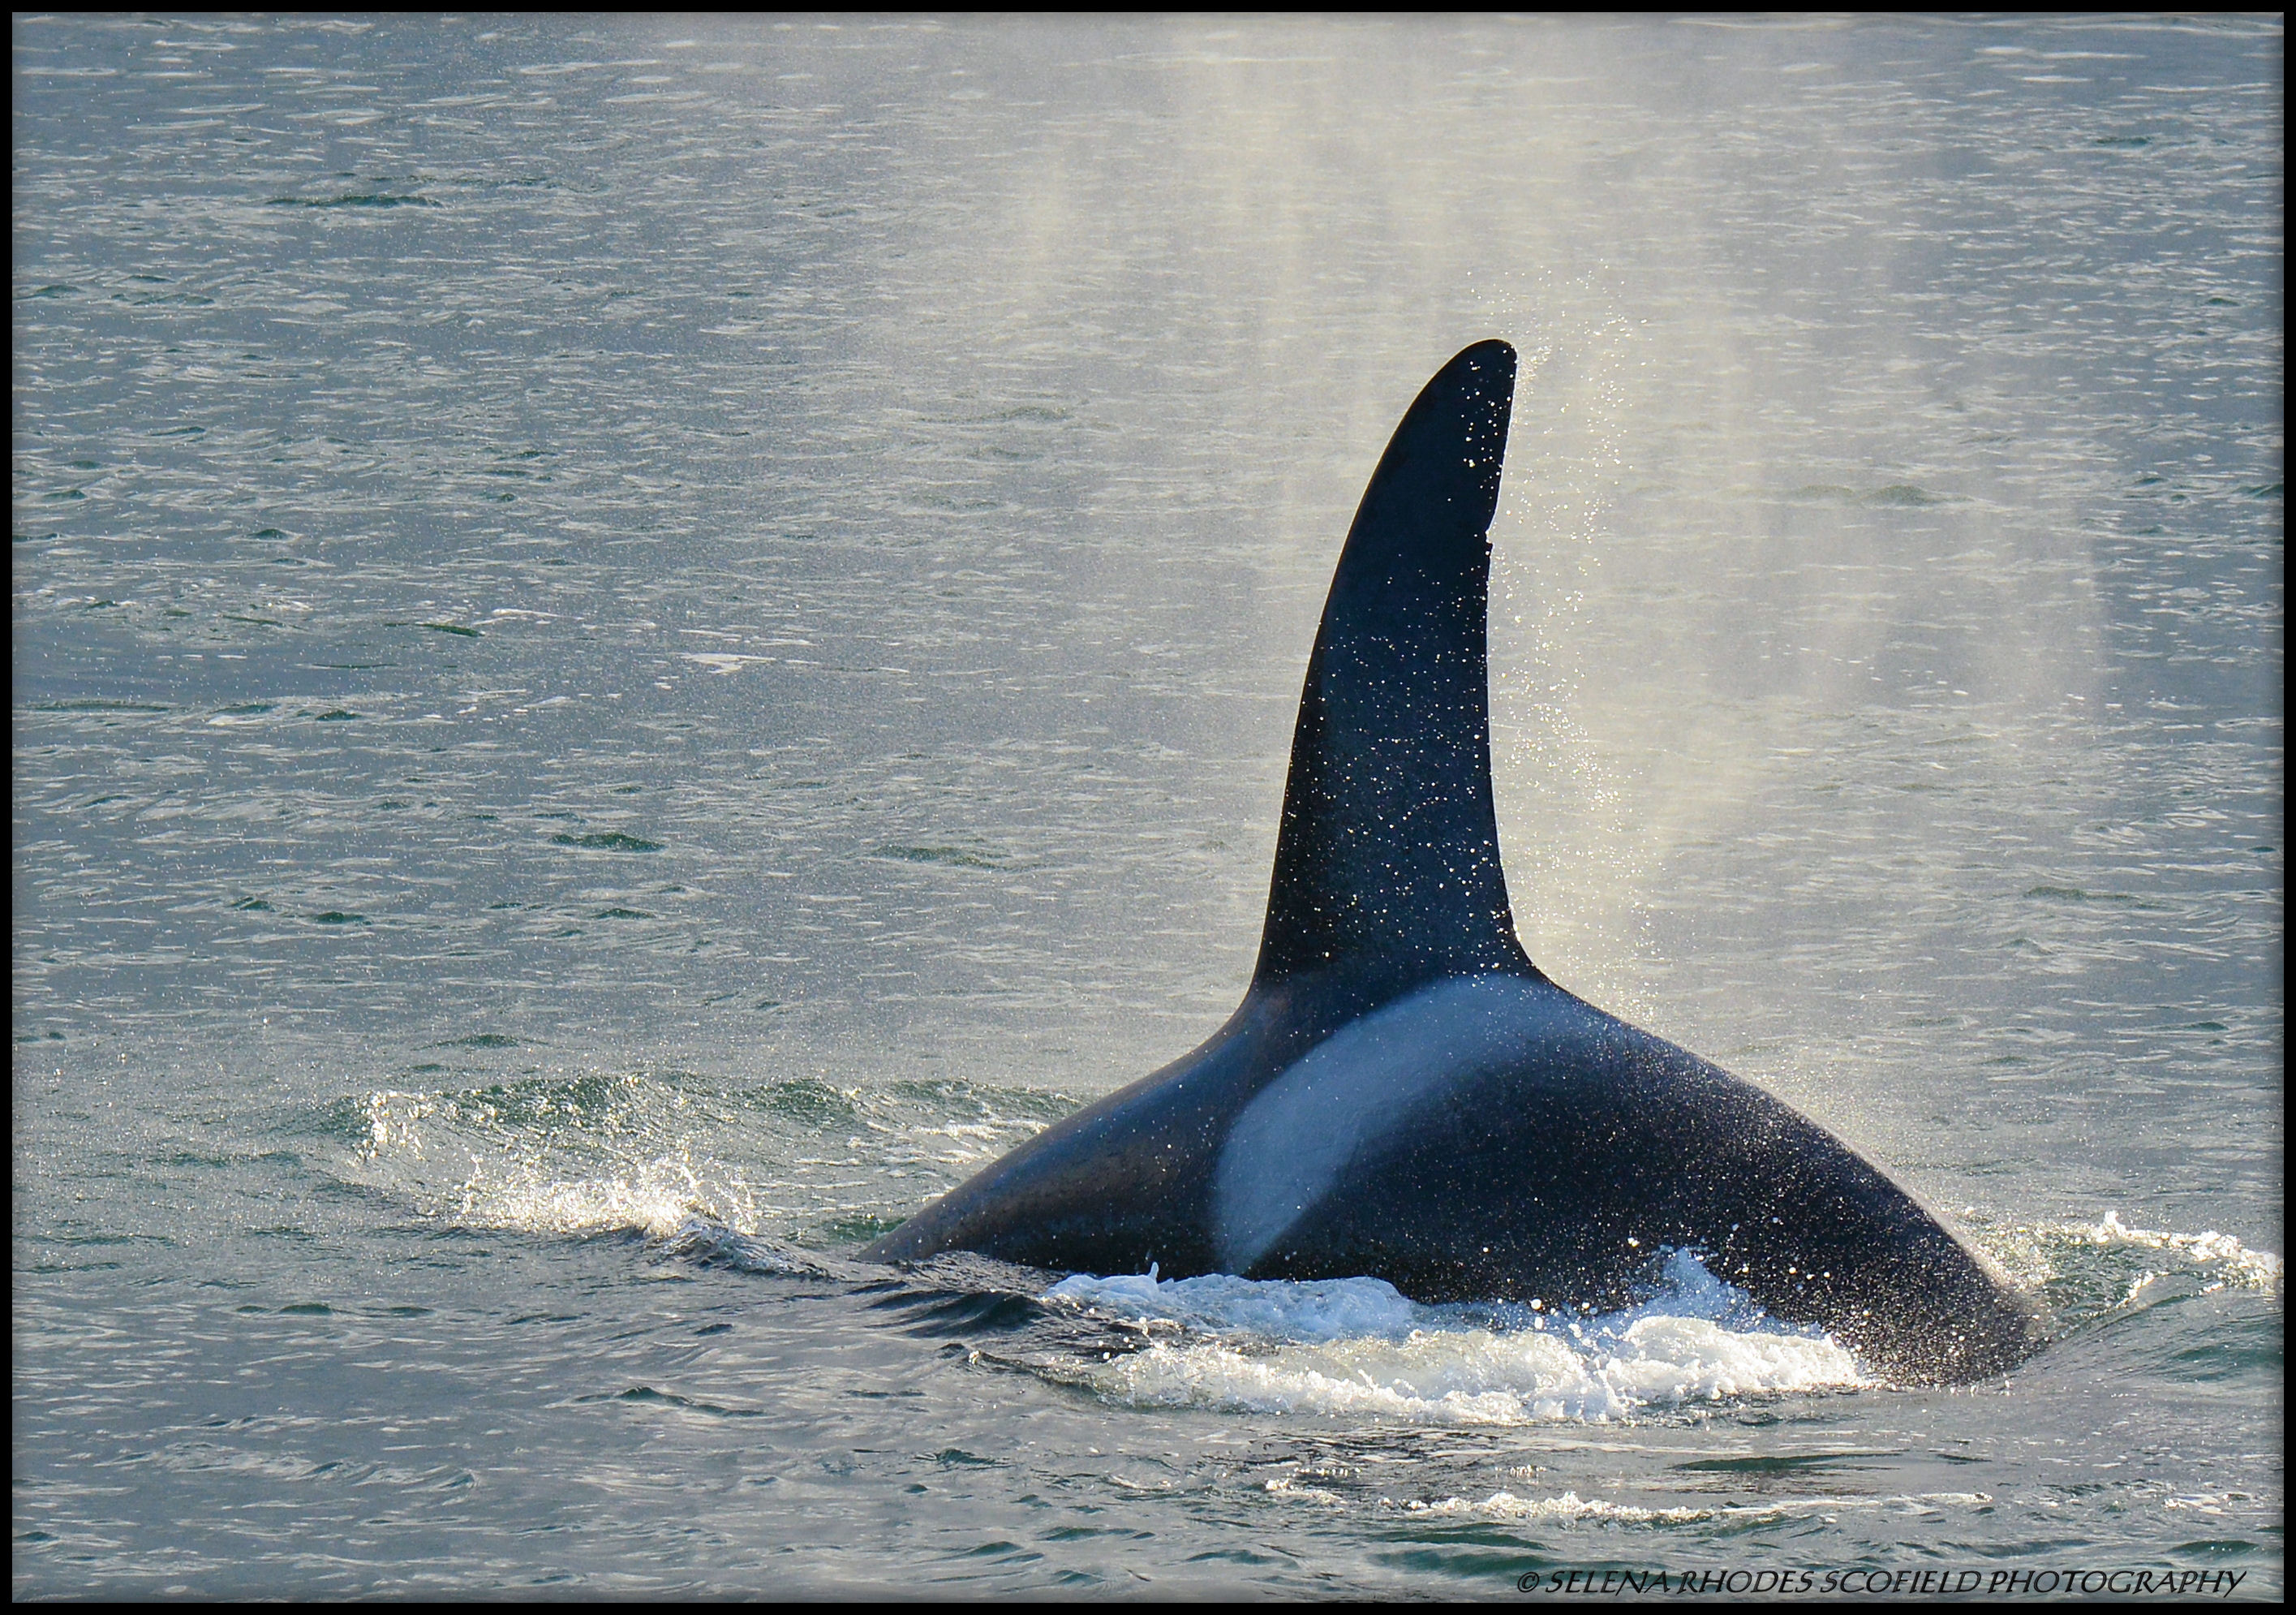 My First Time Seeing Killer Whales from Land! – 4/4/13